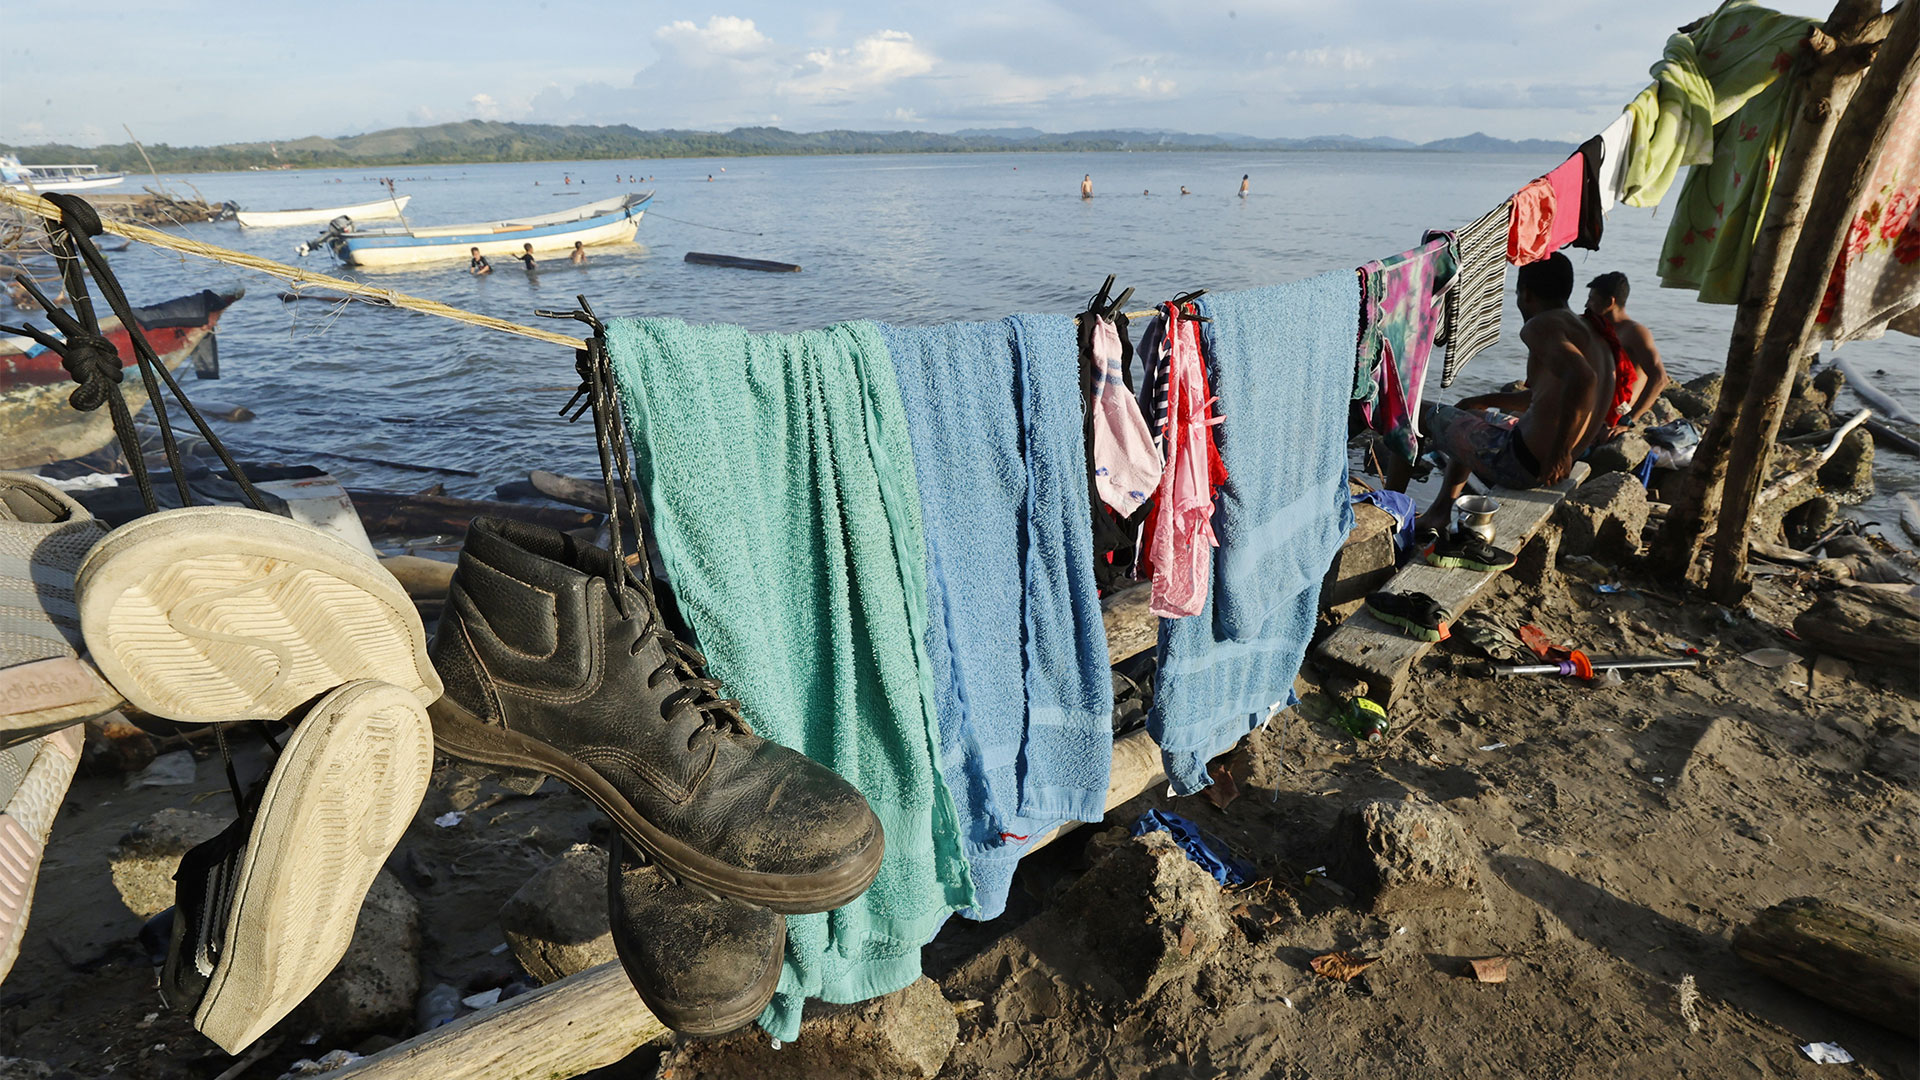 Clothes and towels of migrants waiting to board a boat to the border with Panama (EFE/ Mauricio Dueñas Castañeda)